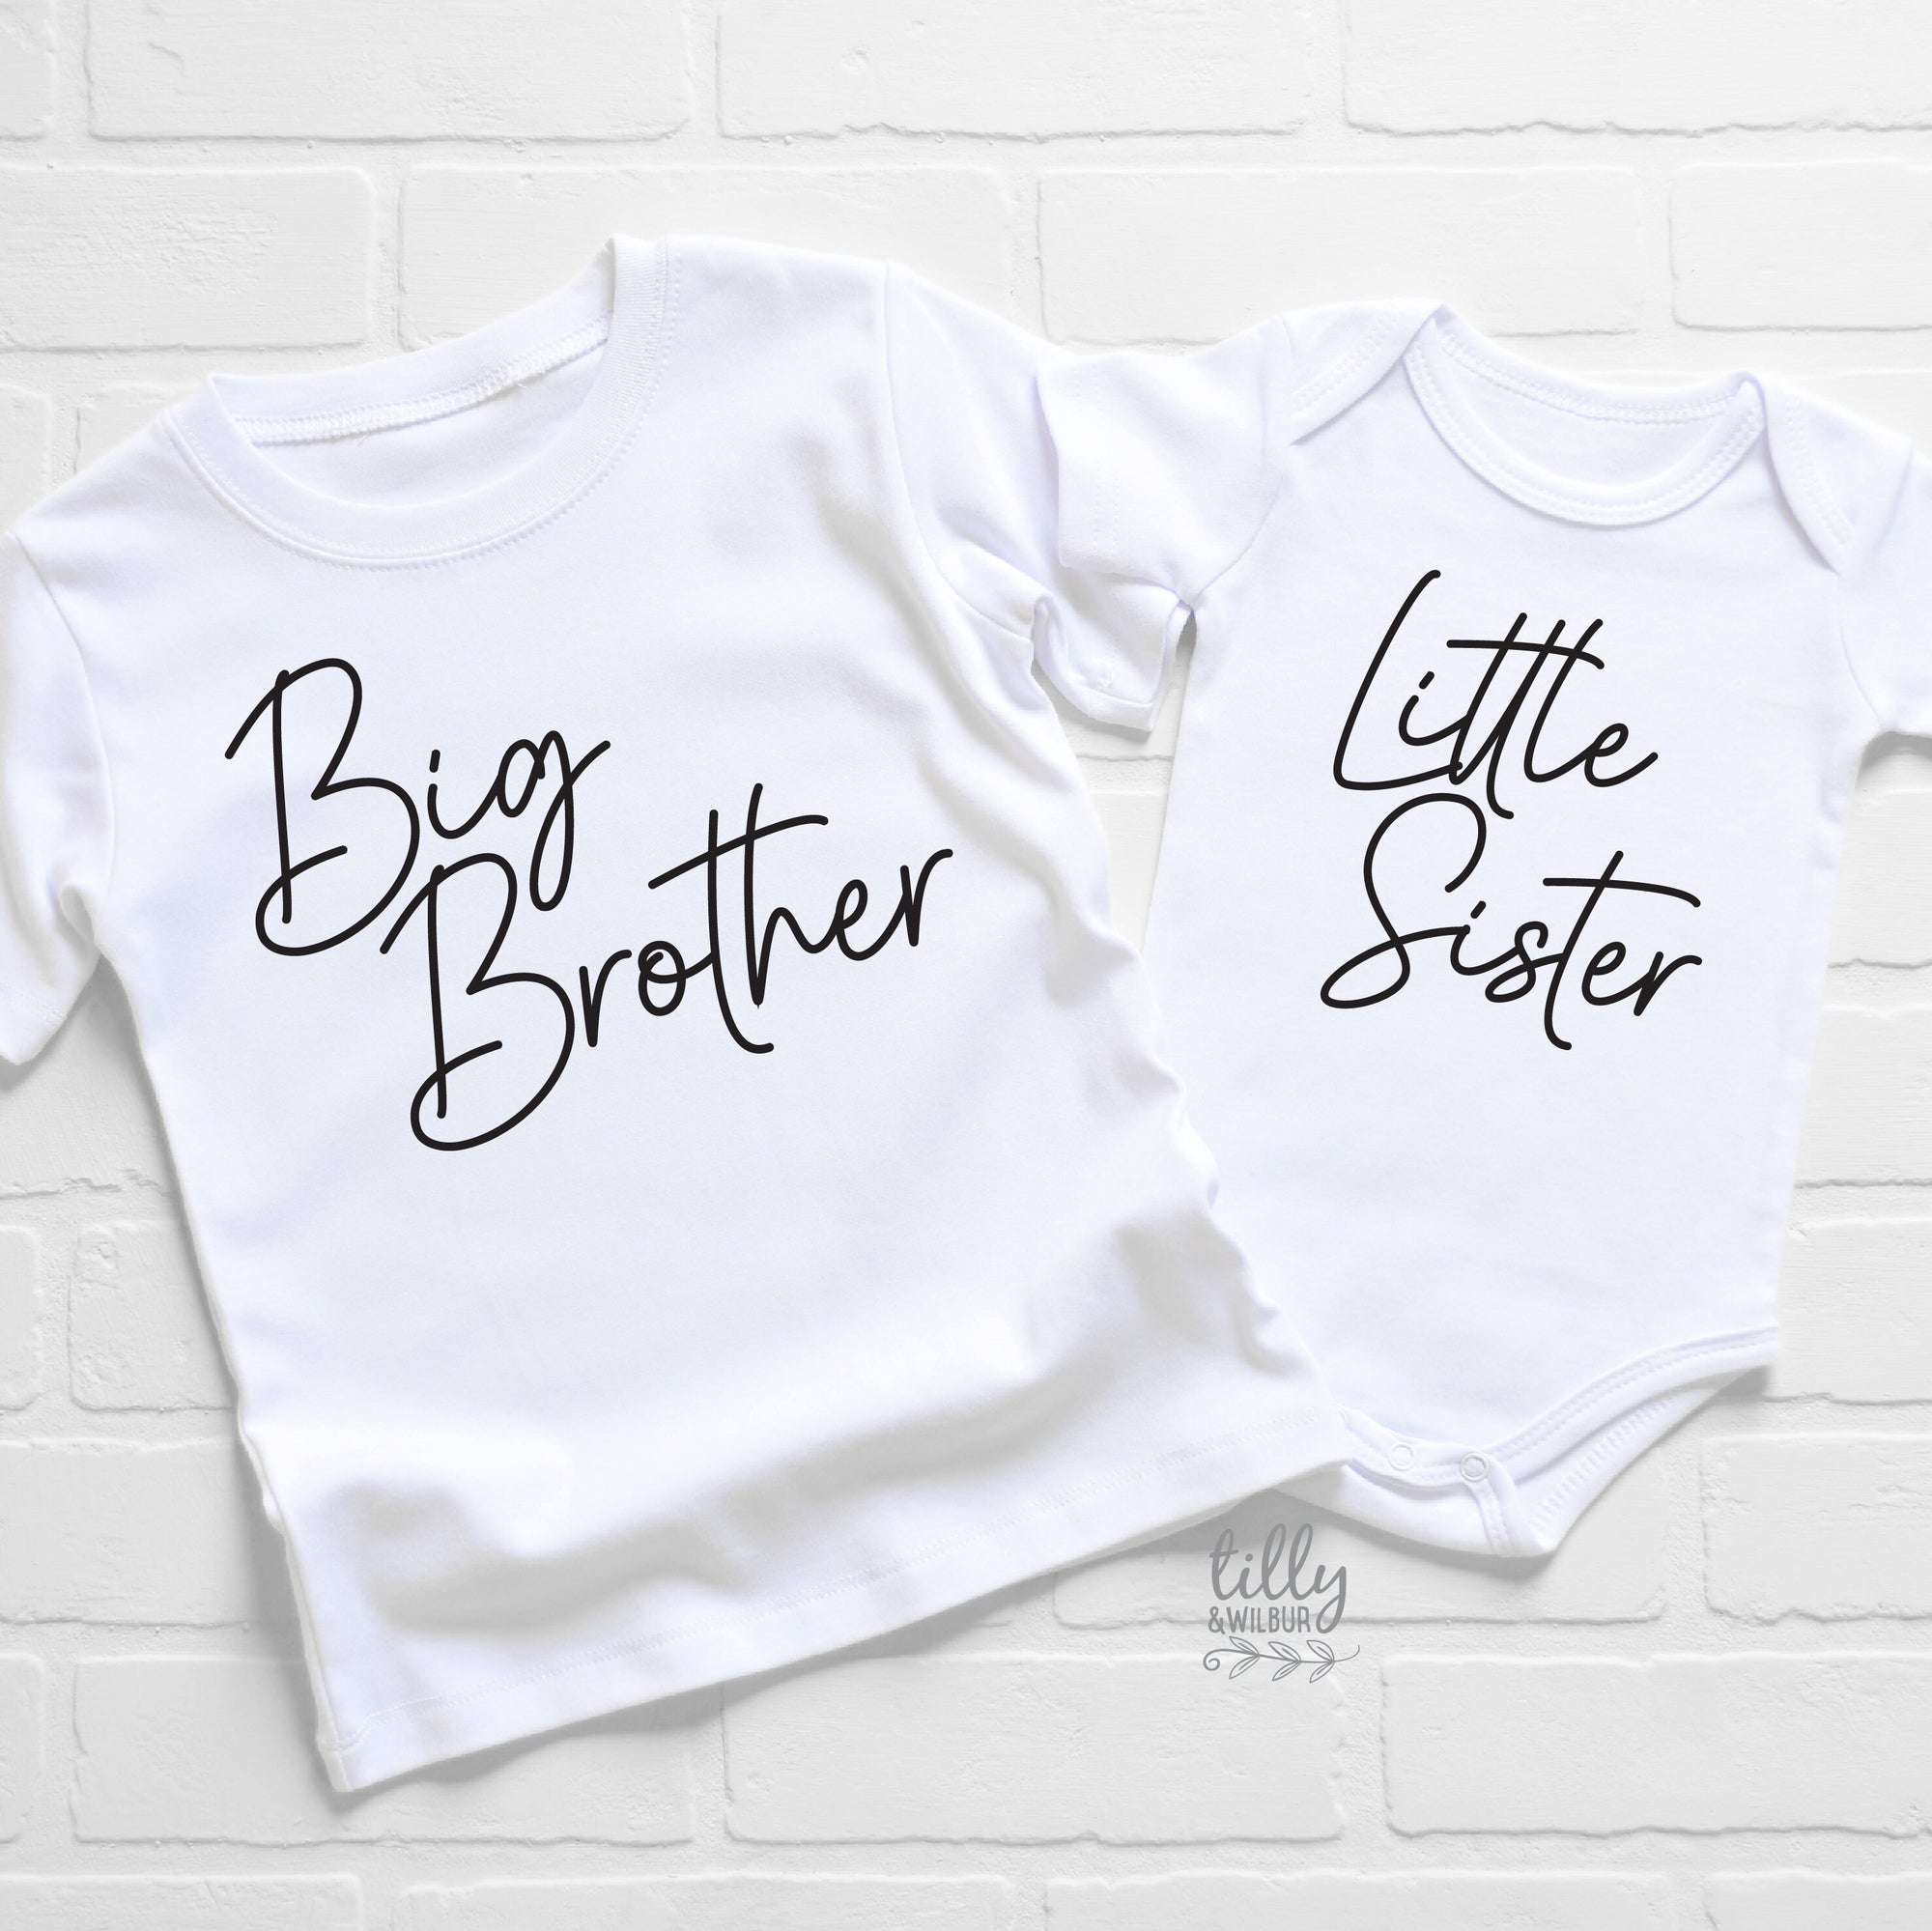 Big Brother Little Sister Matching Set, Big Bro Little Sis Set, Matching Sister Brother, Matching Sibling Shirts, Pregnancy Announcement